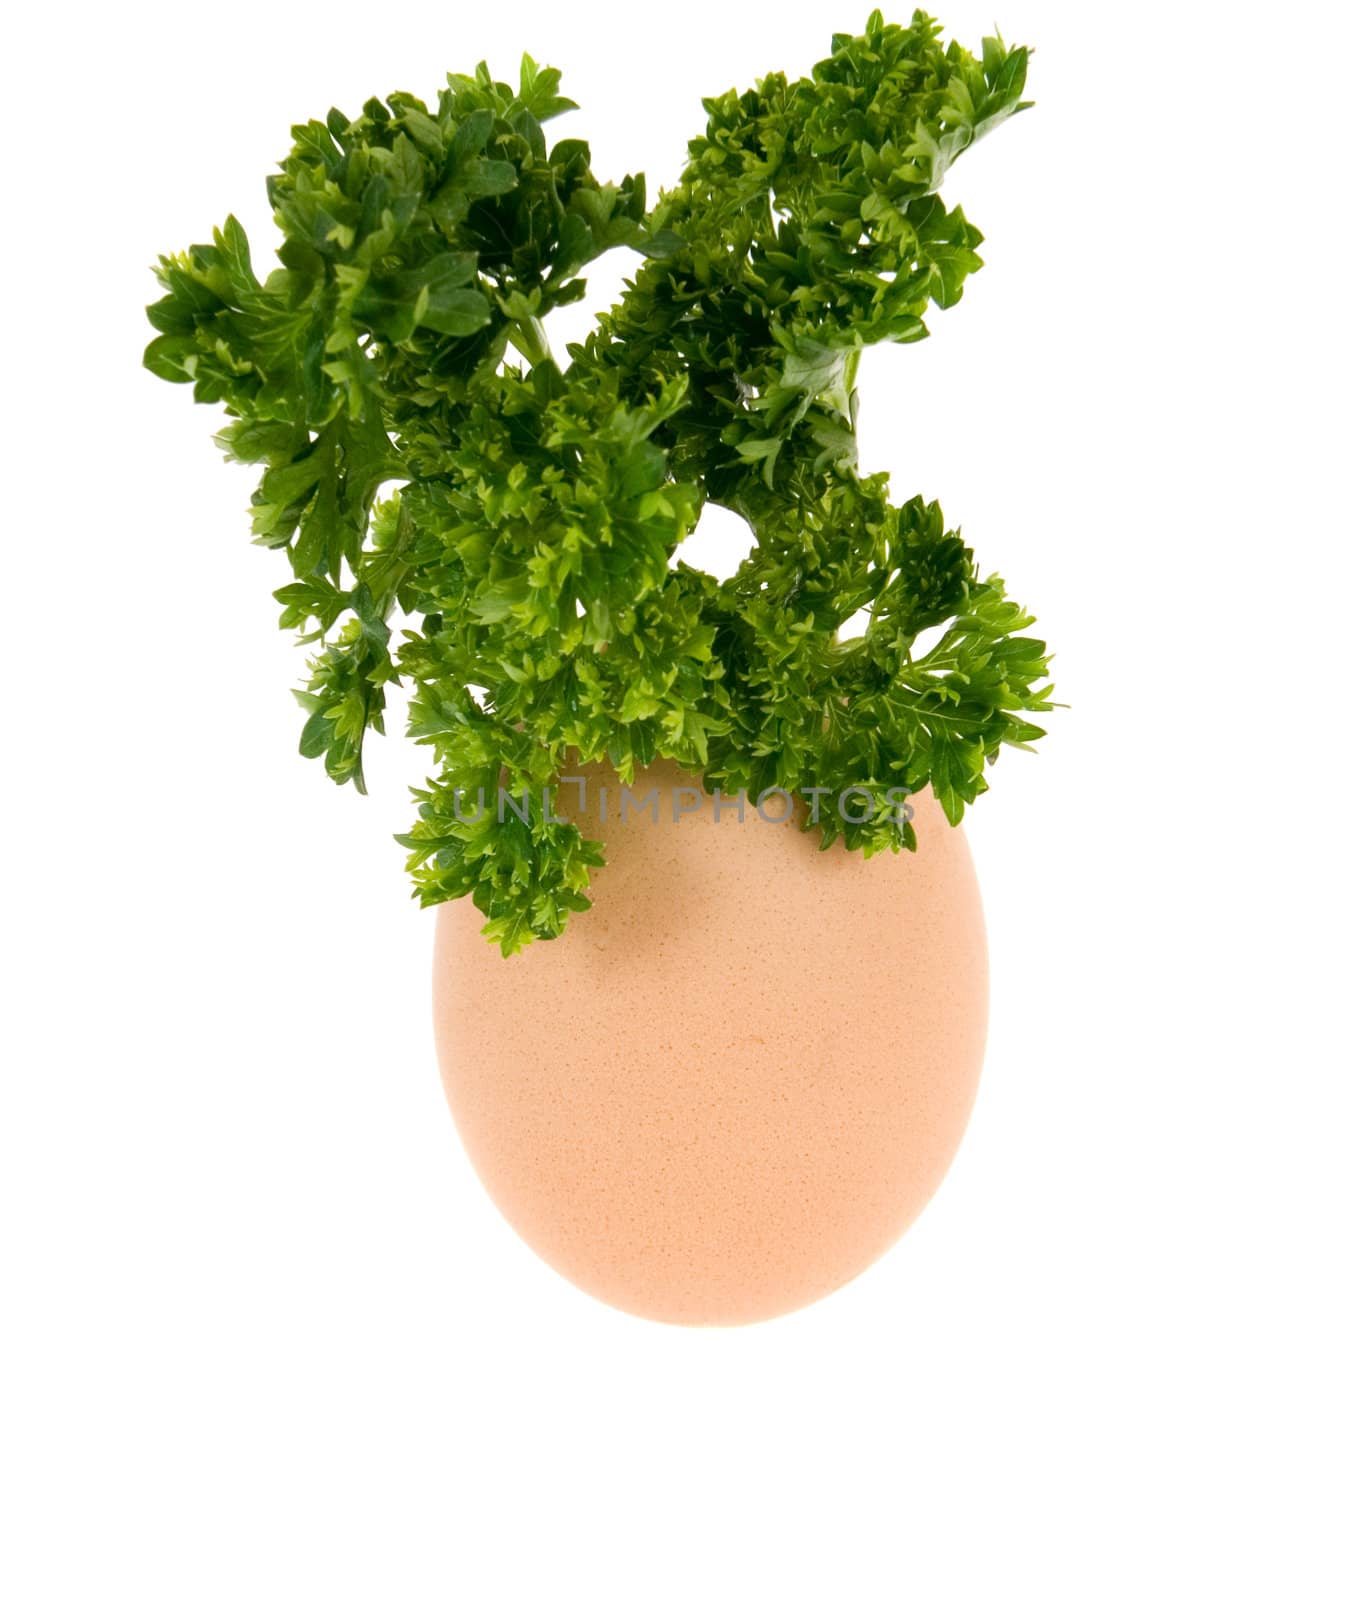 egg from which grows herb